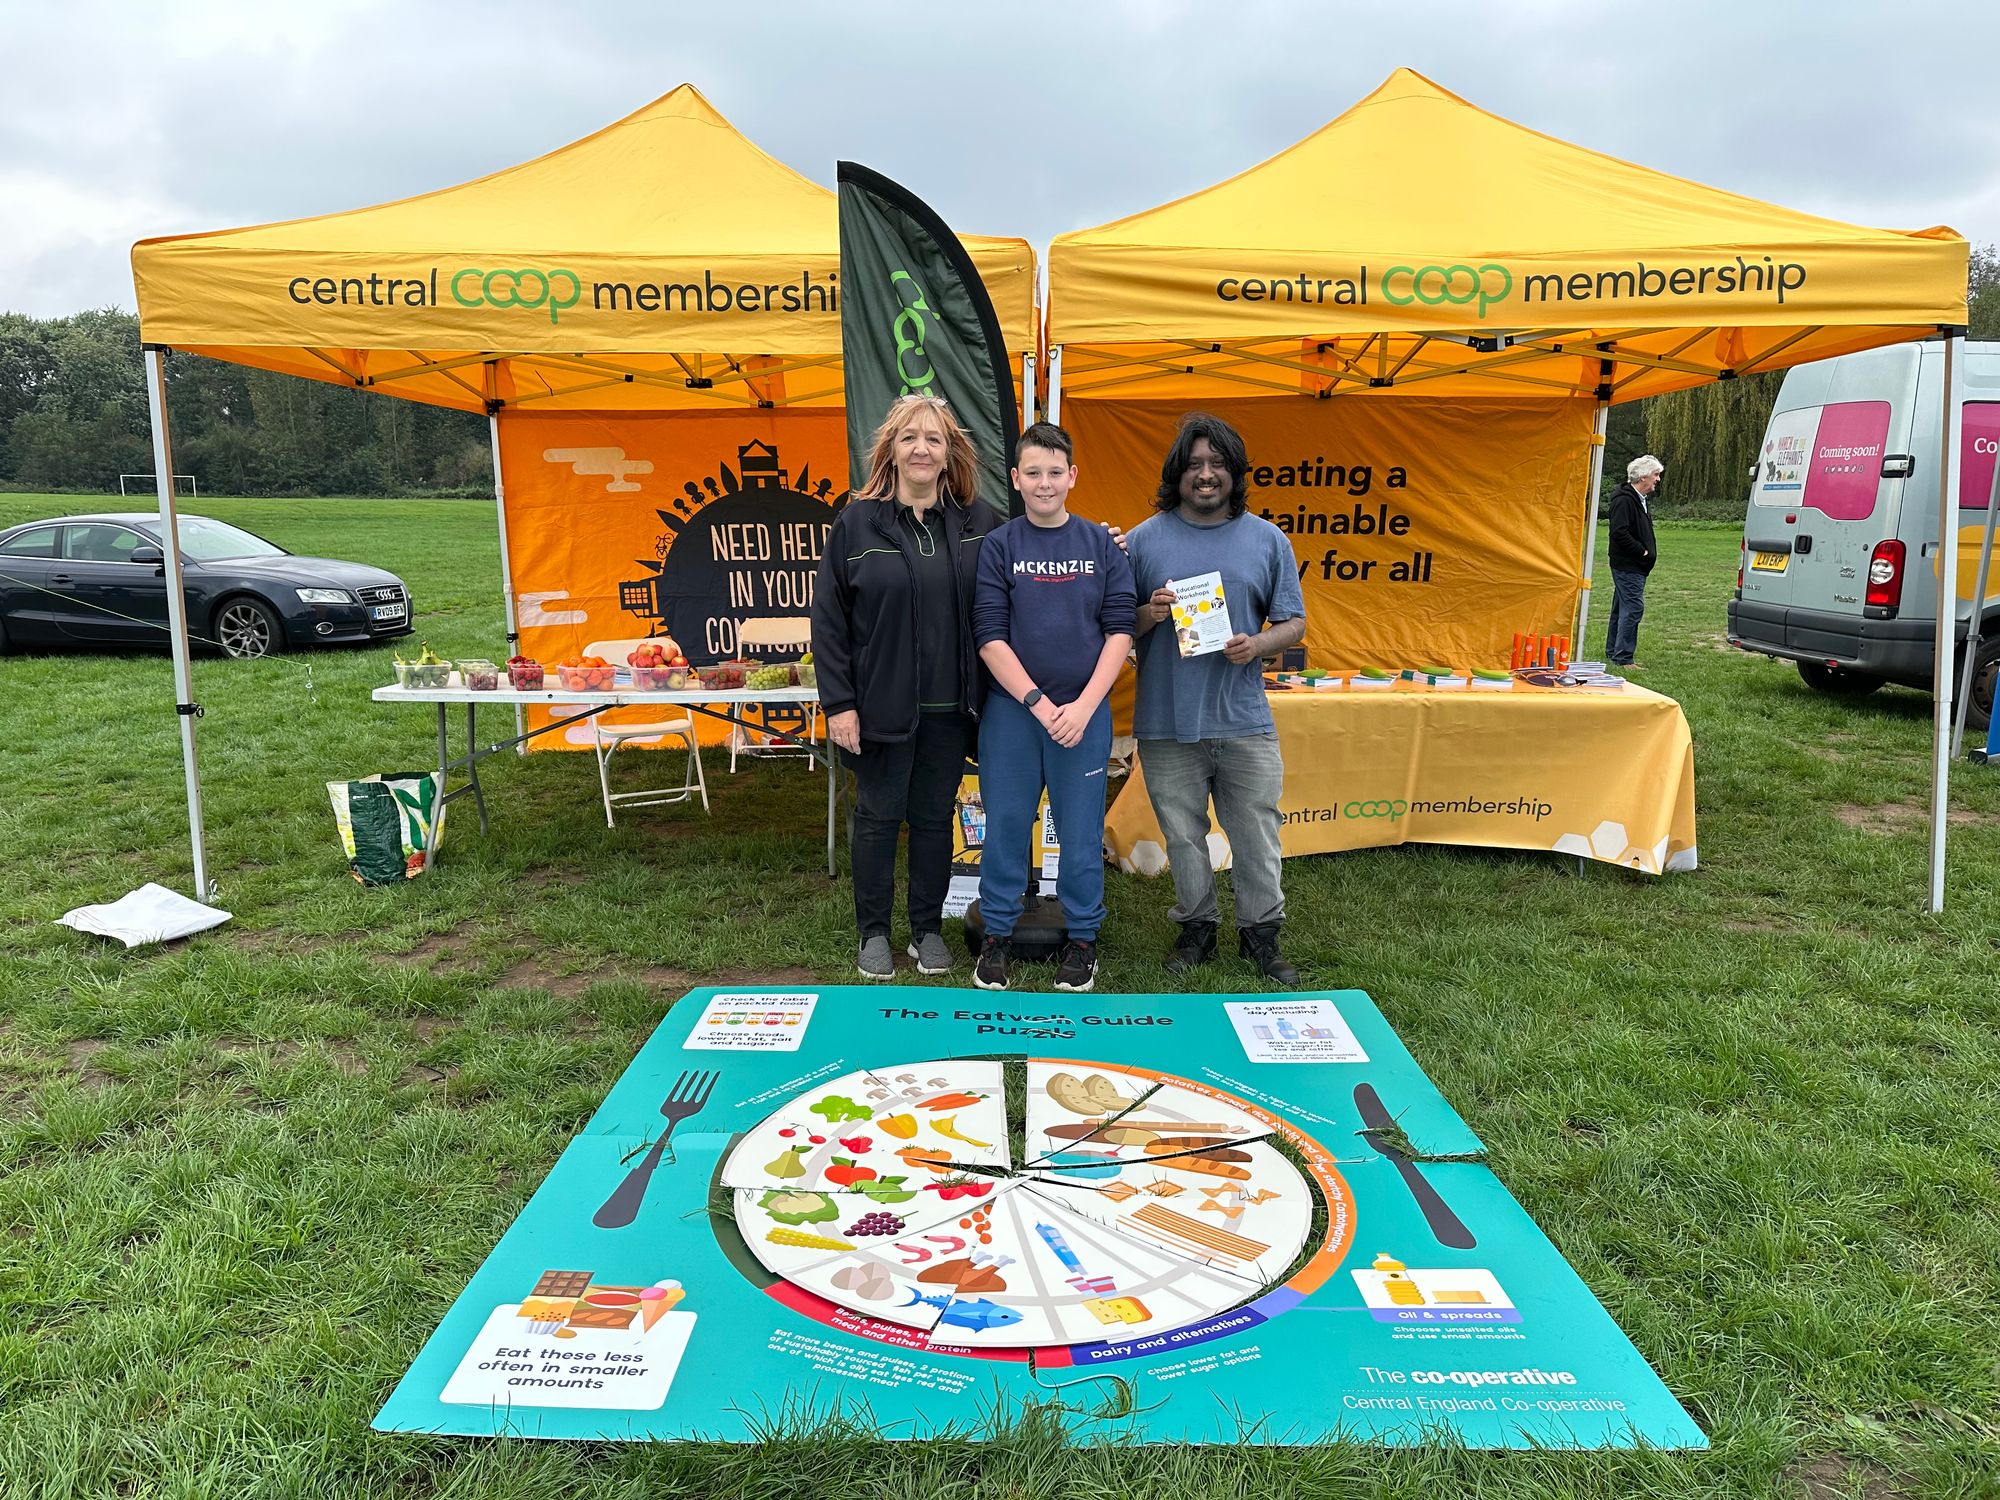 Central Co-op supports Lichfield at their Community Games